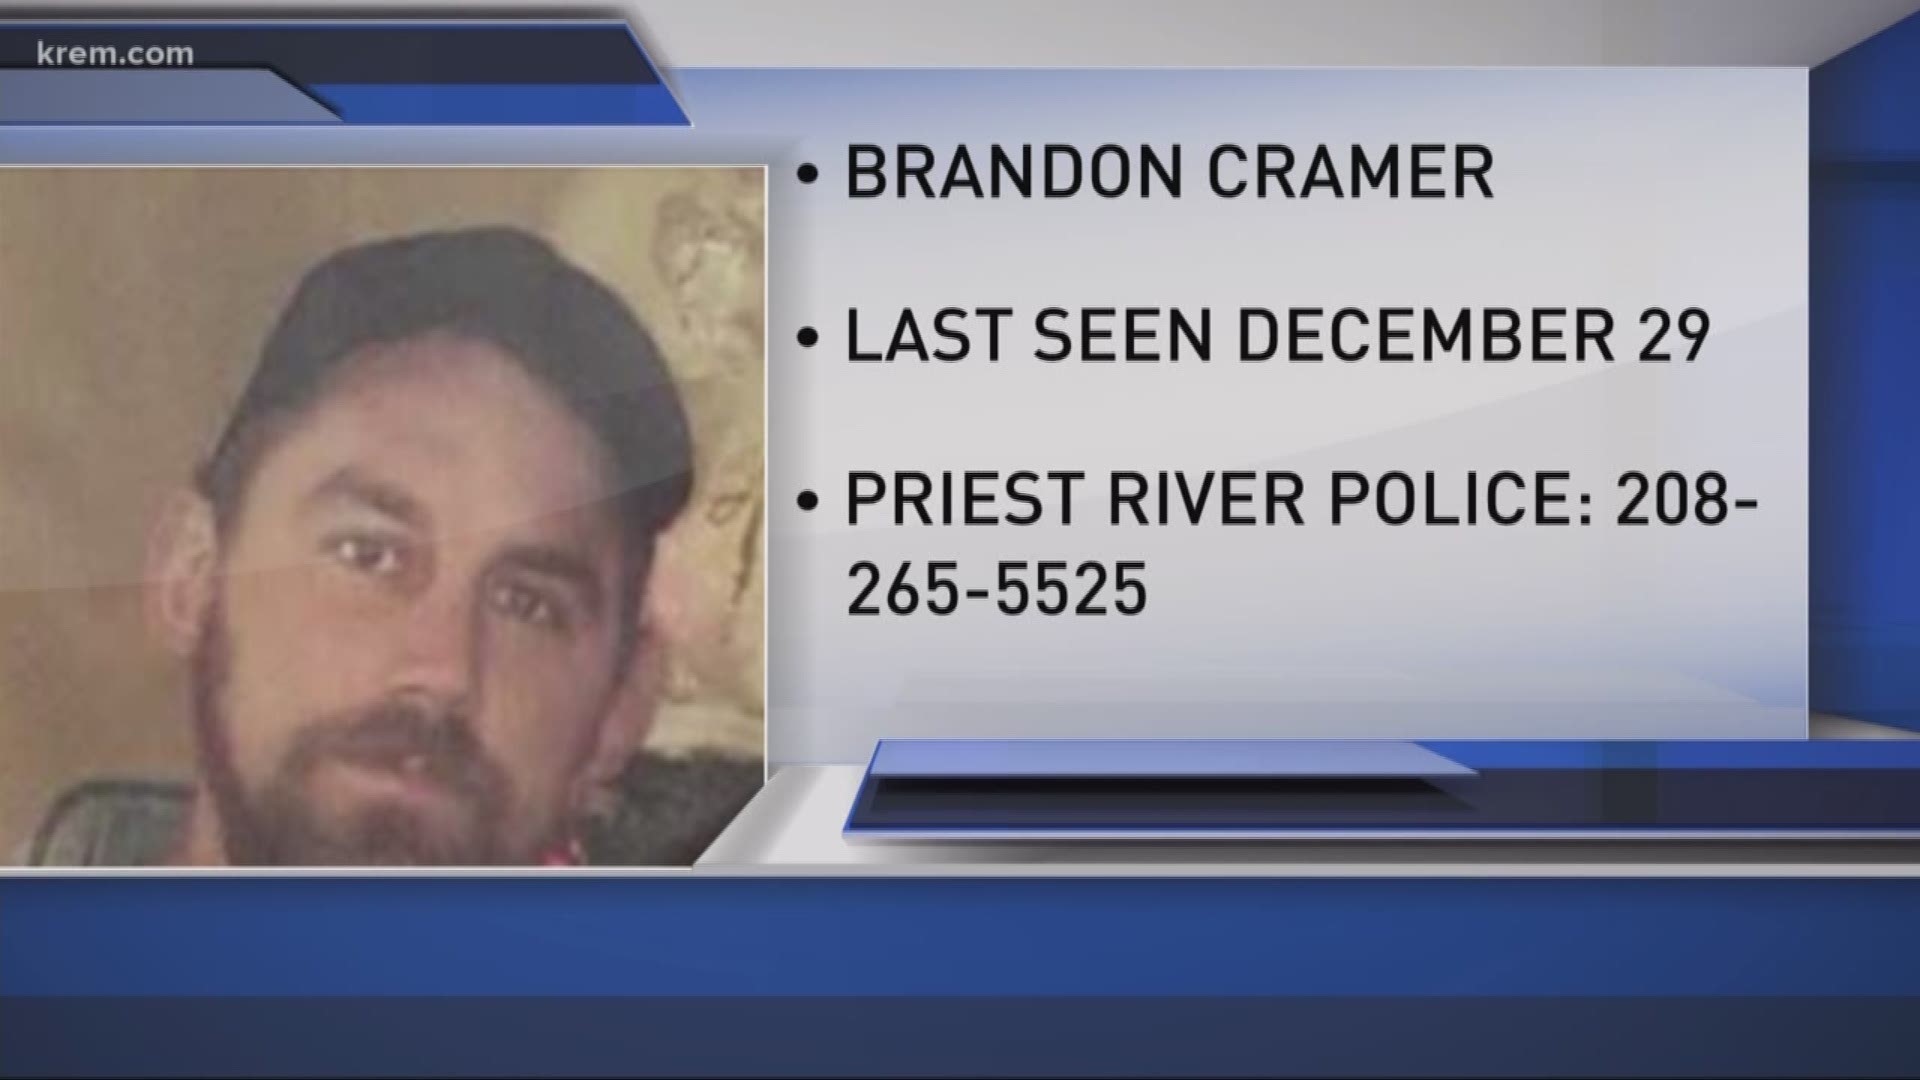 Officials said a family member reported Brandon Cramer missing on Monday.